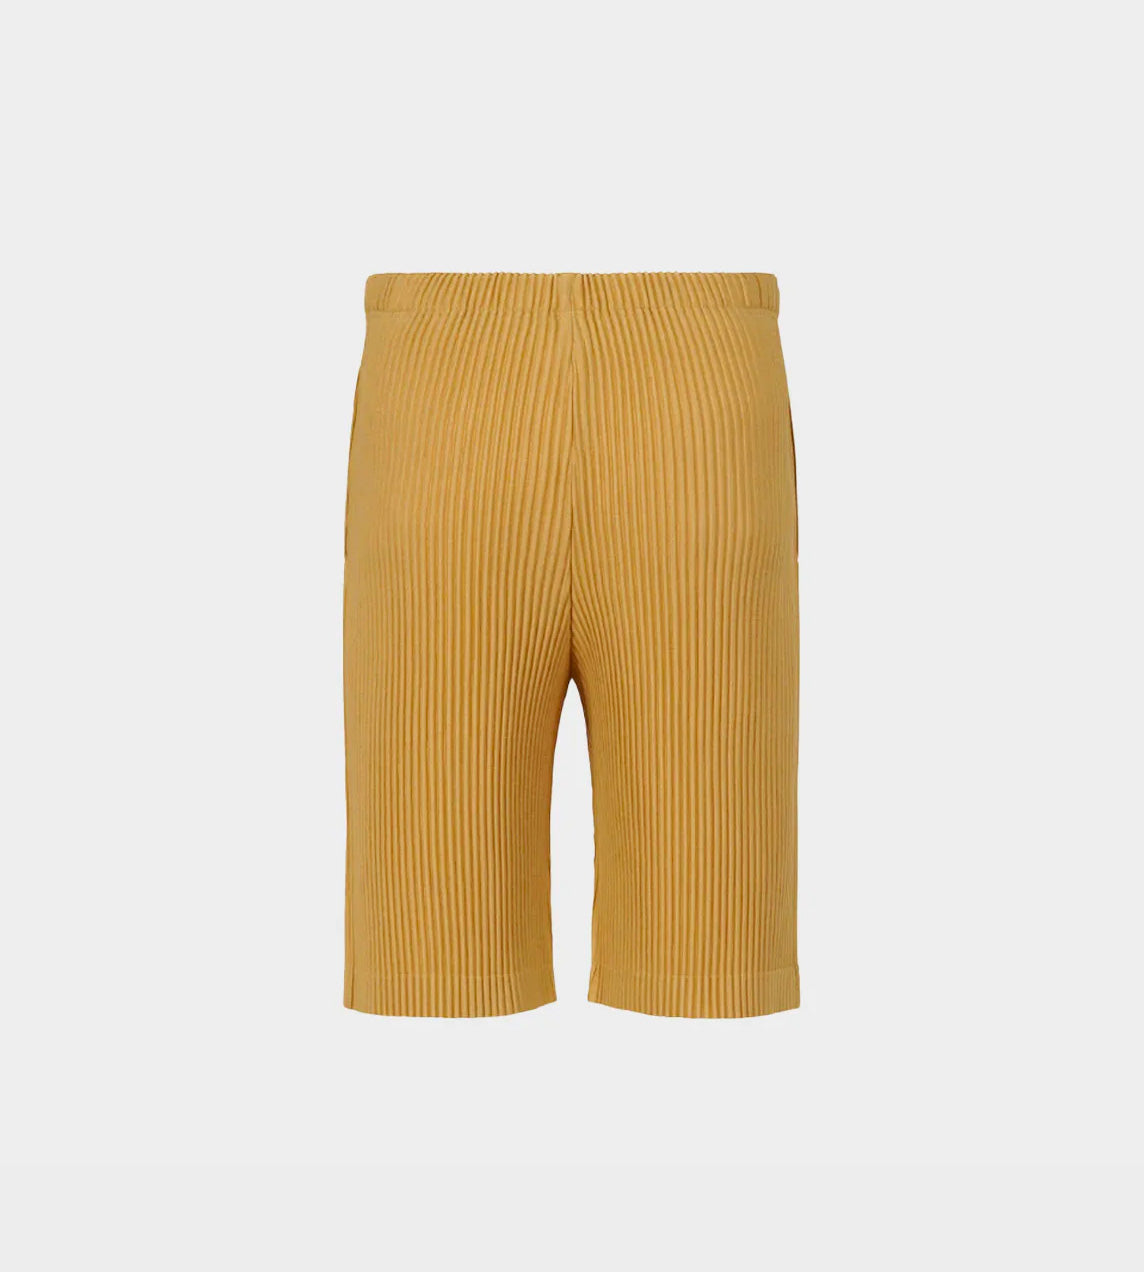 Homme Plisse Issey Miyake - Pleated Hiking Short Golden Yellow